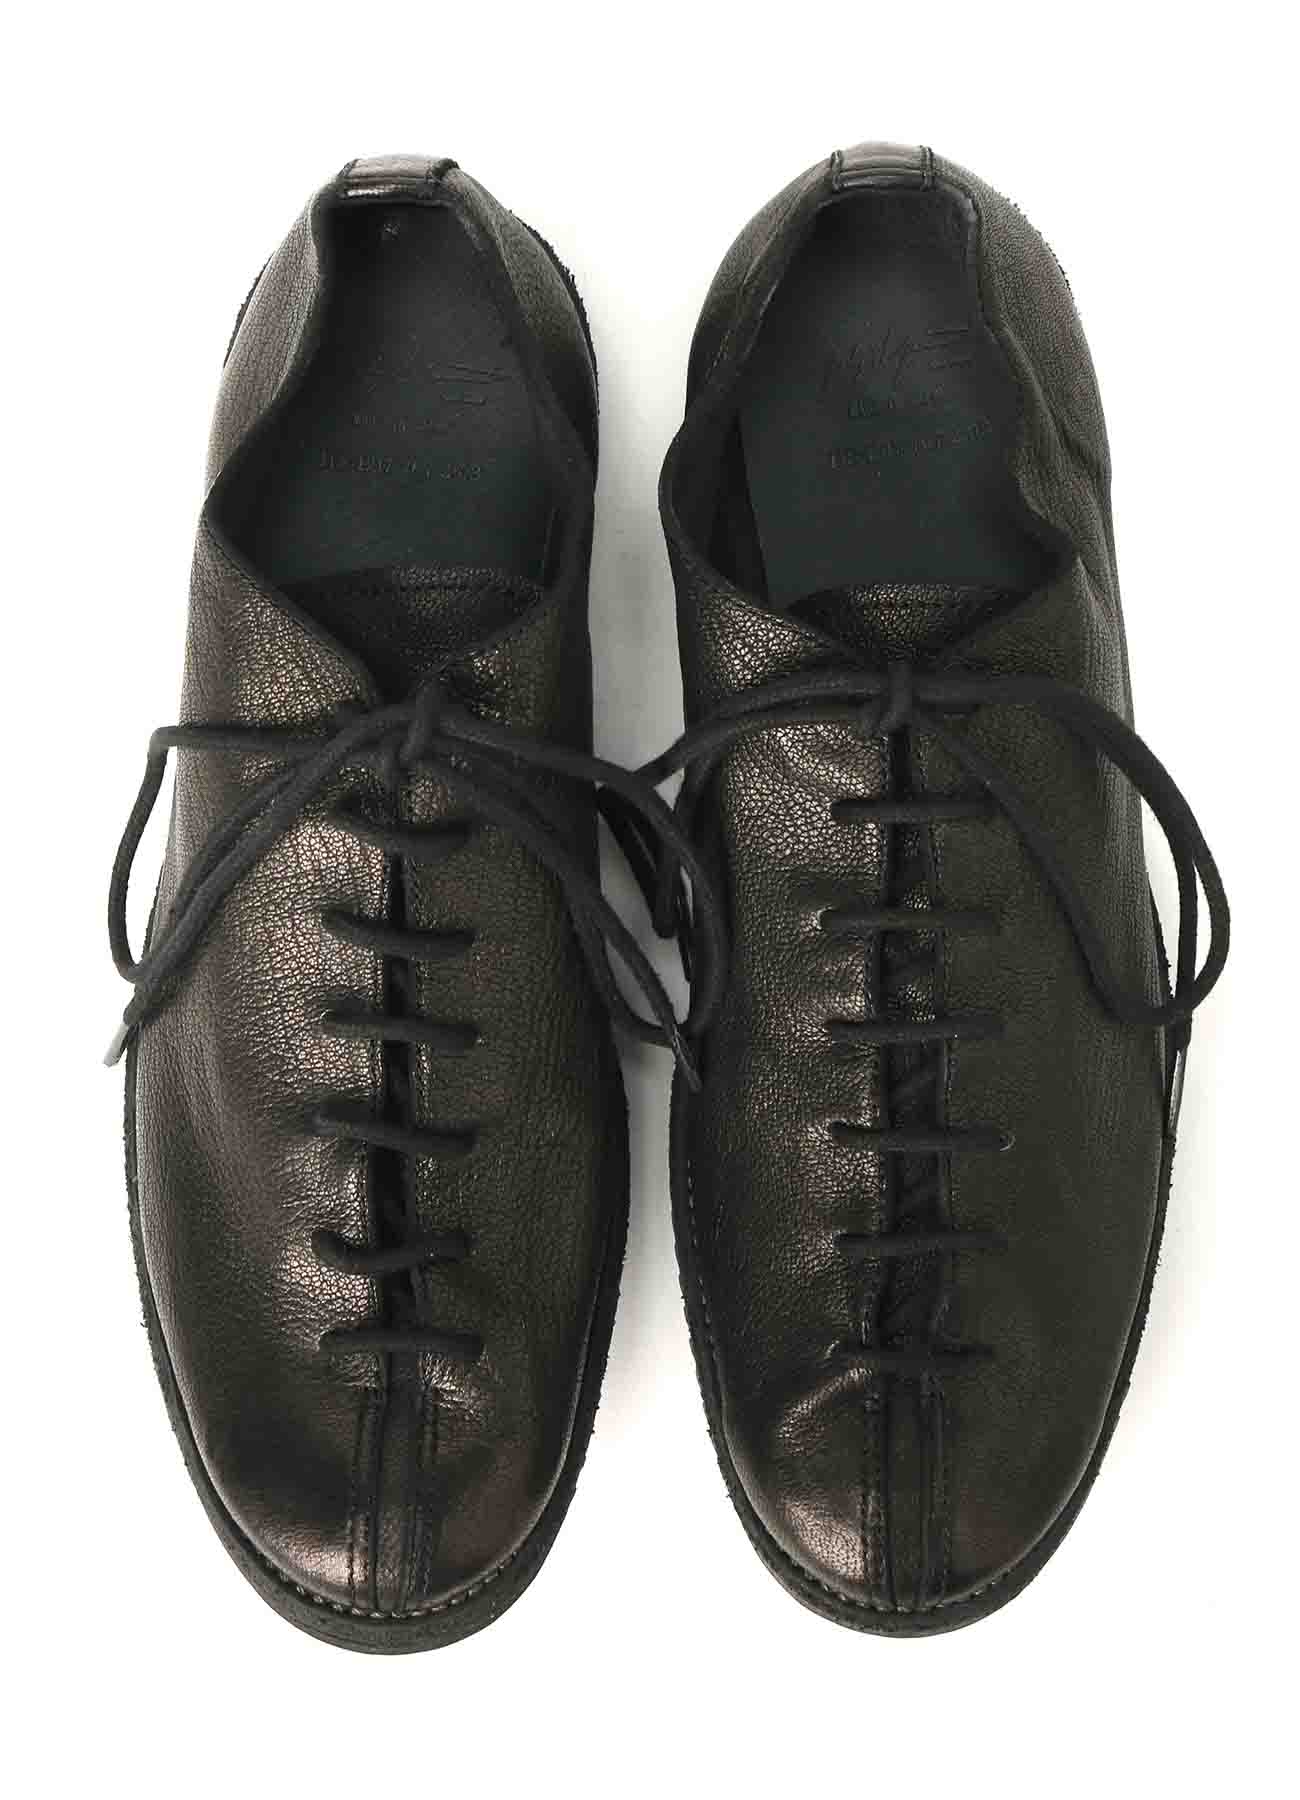 PRODUCT DYED GOAT SKIN GARMENT DYE LACE-UP SHOES